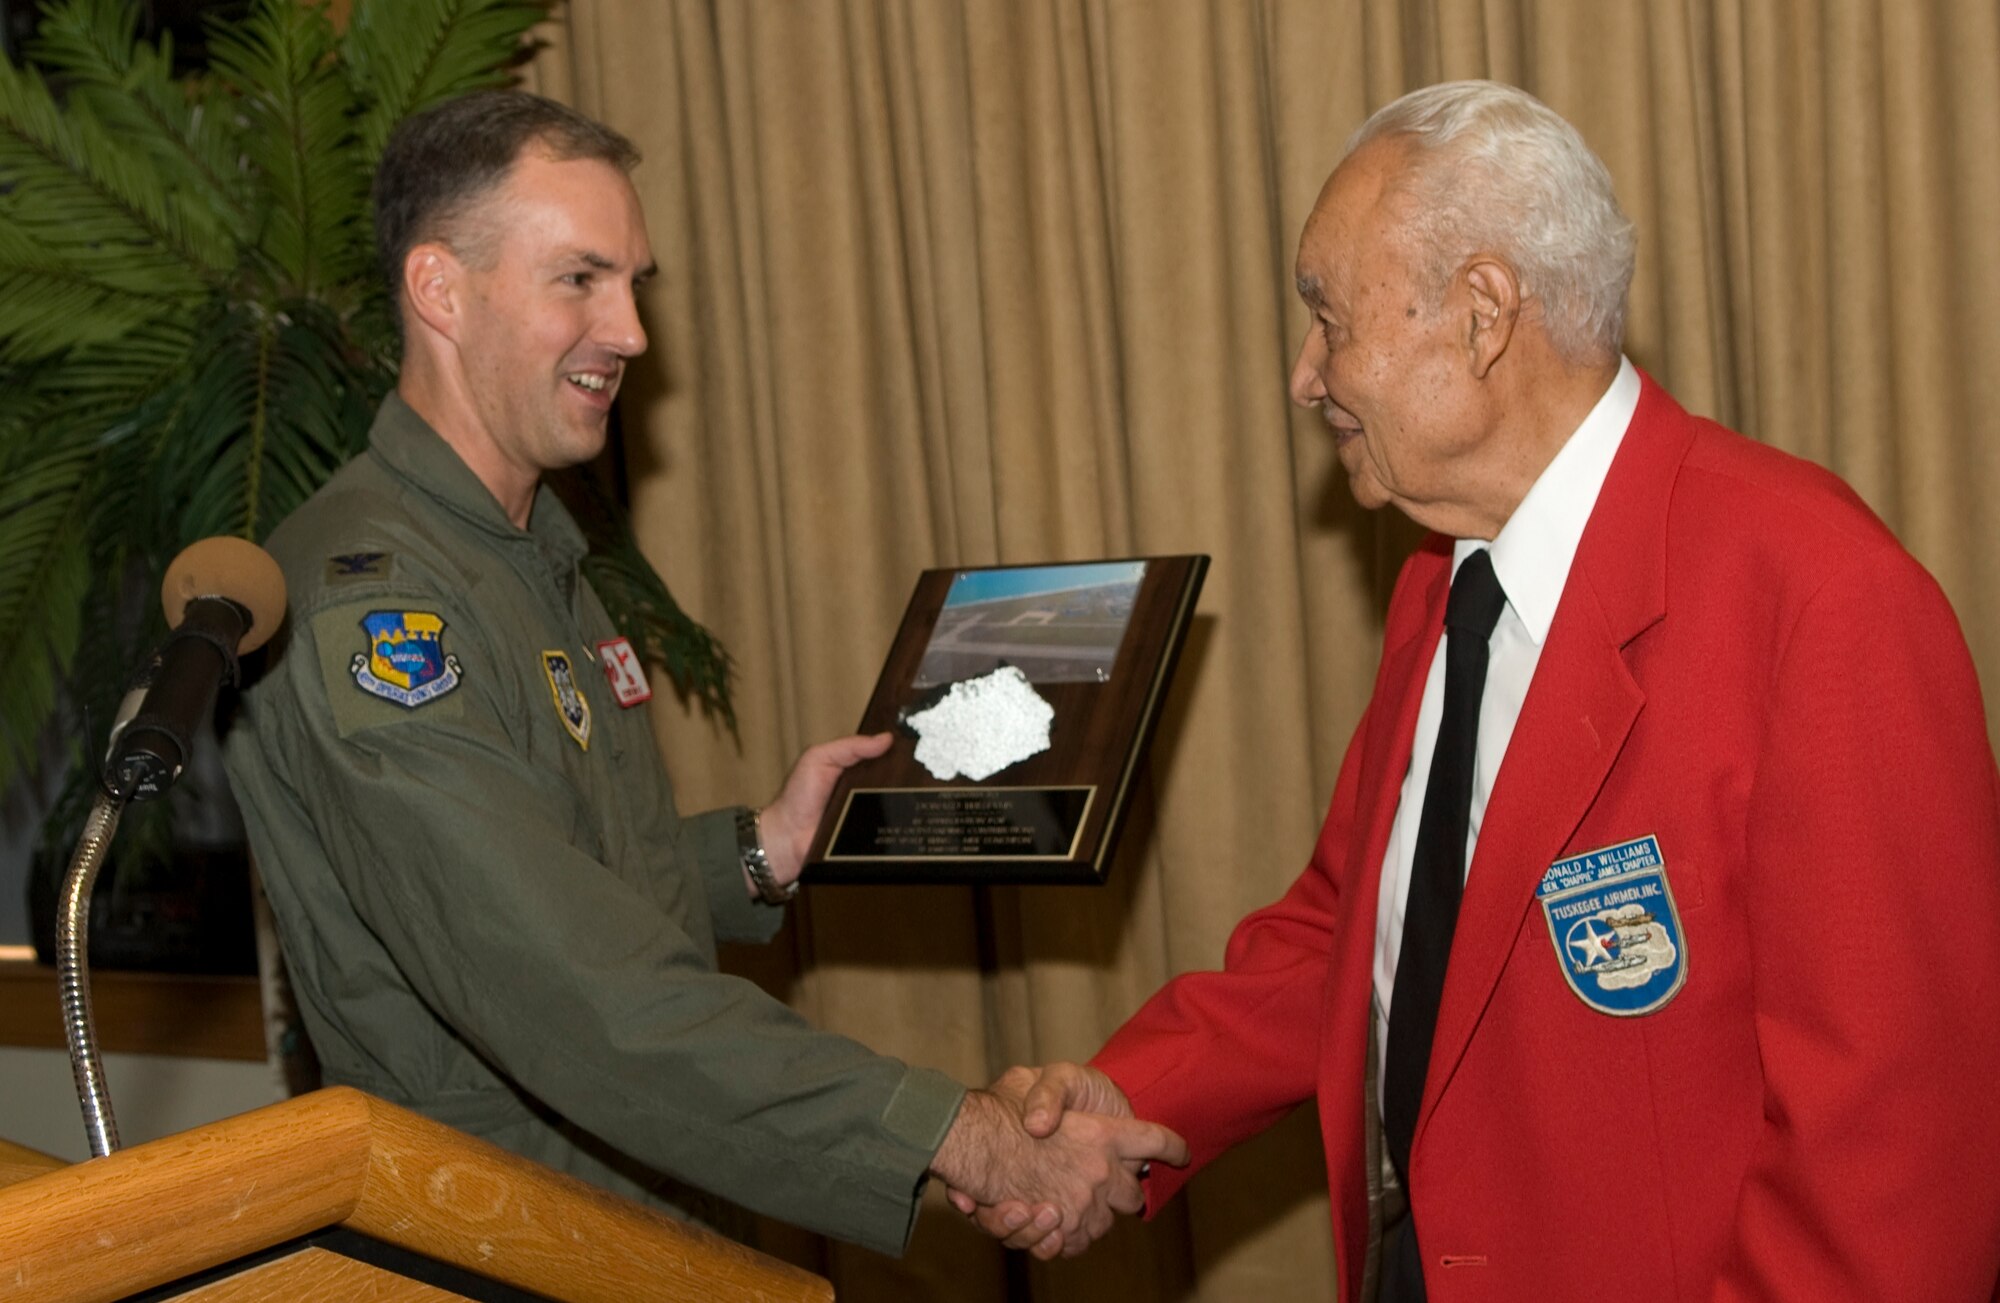 45th Operations Group Commander Col. Bernard Gruber presents Donald Williams with a piece of Patrick AFB runway as a token of thanks for speaking at the 45th Space Wing’s Martin Luther King Jr. memorial luncheon Tuesday at The Tides. (U.S. Air Force photo by Jim Laviska)